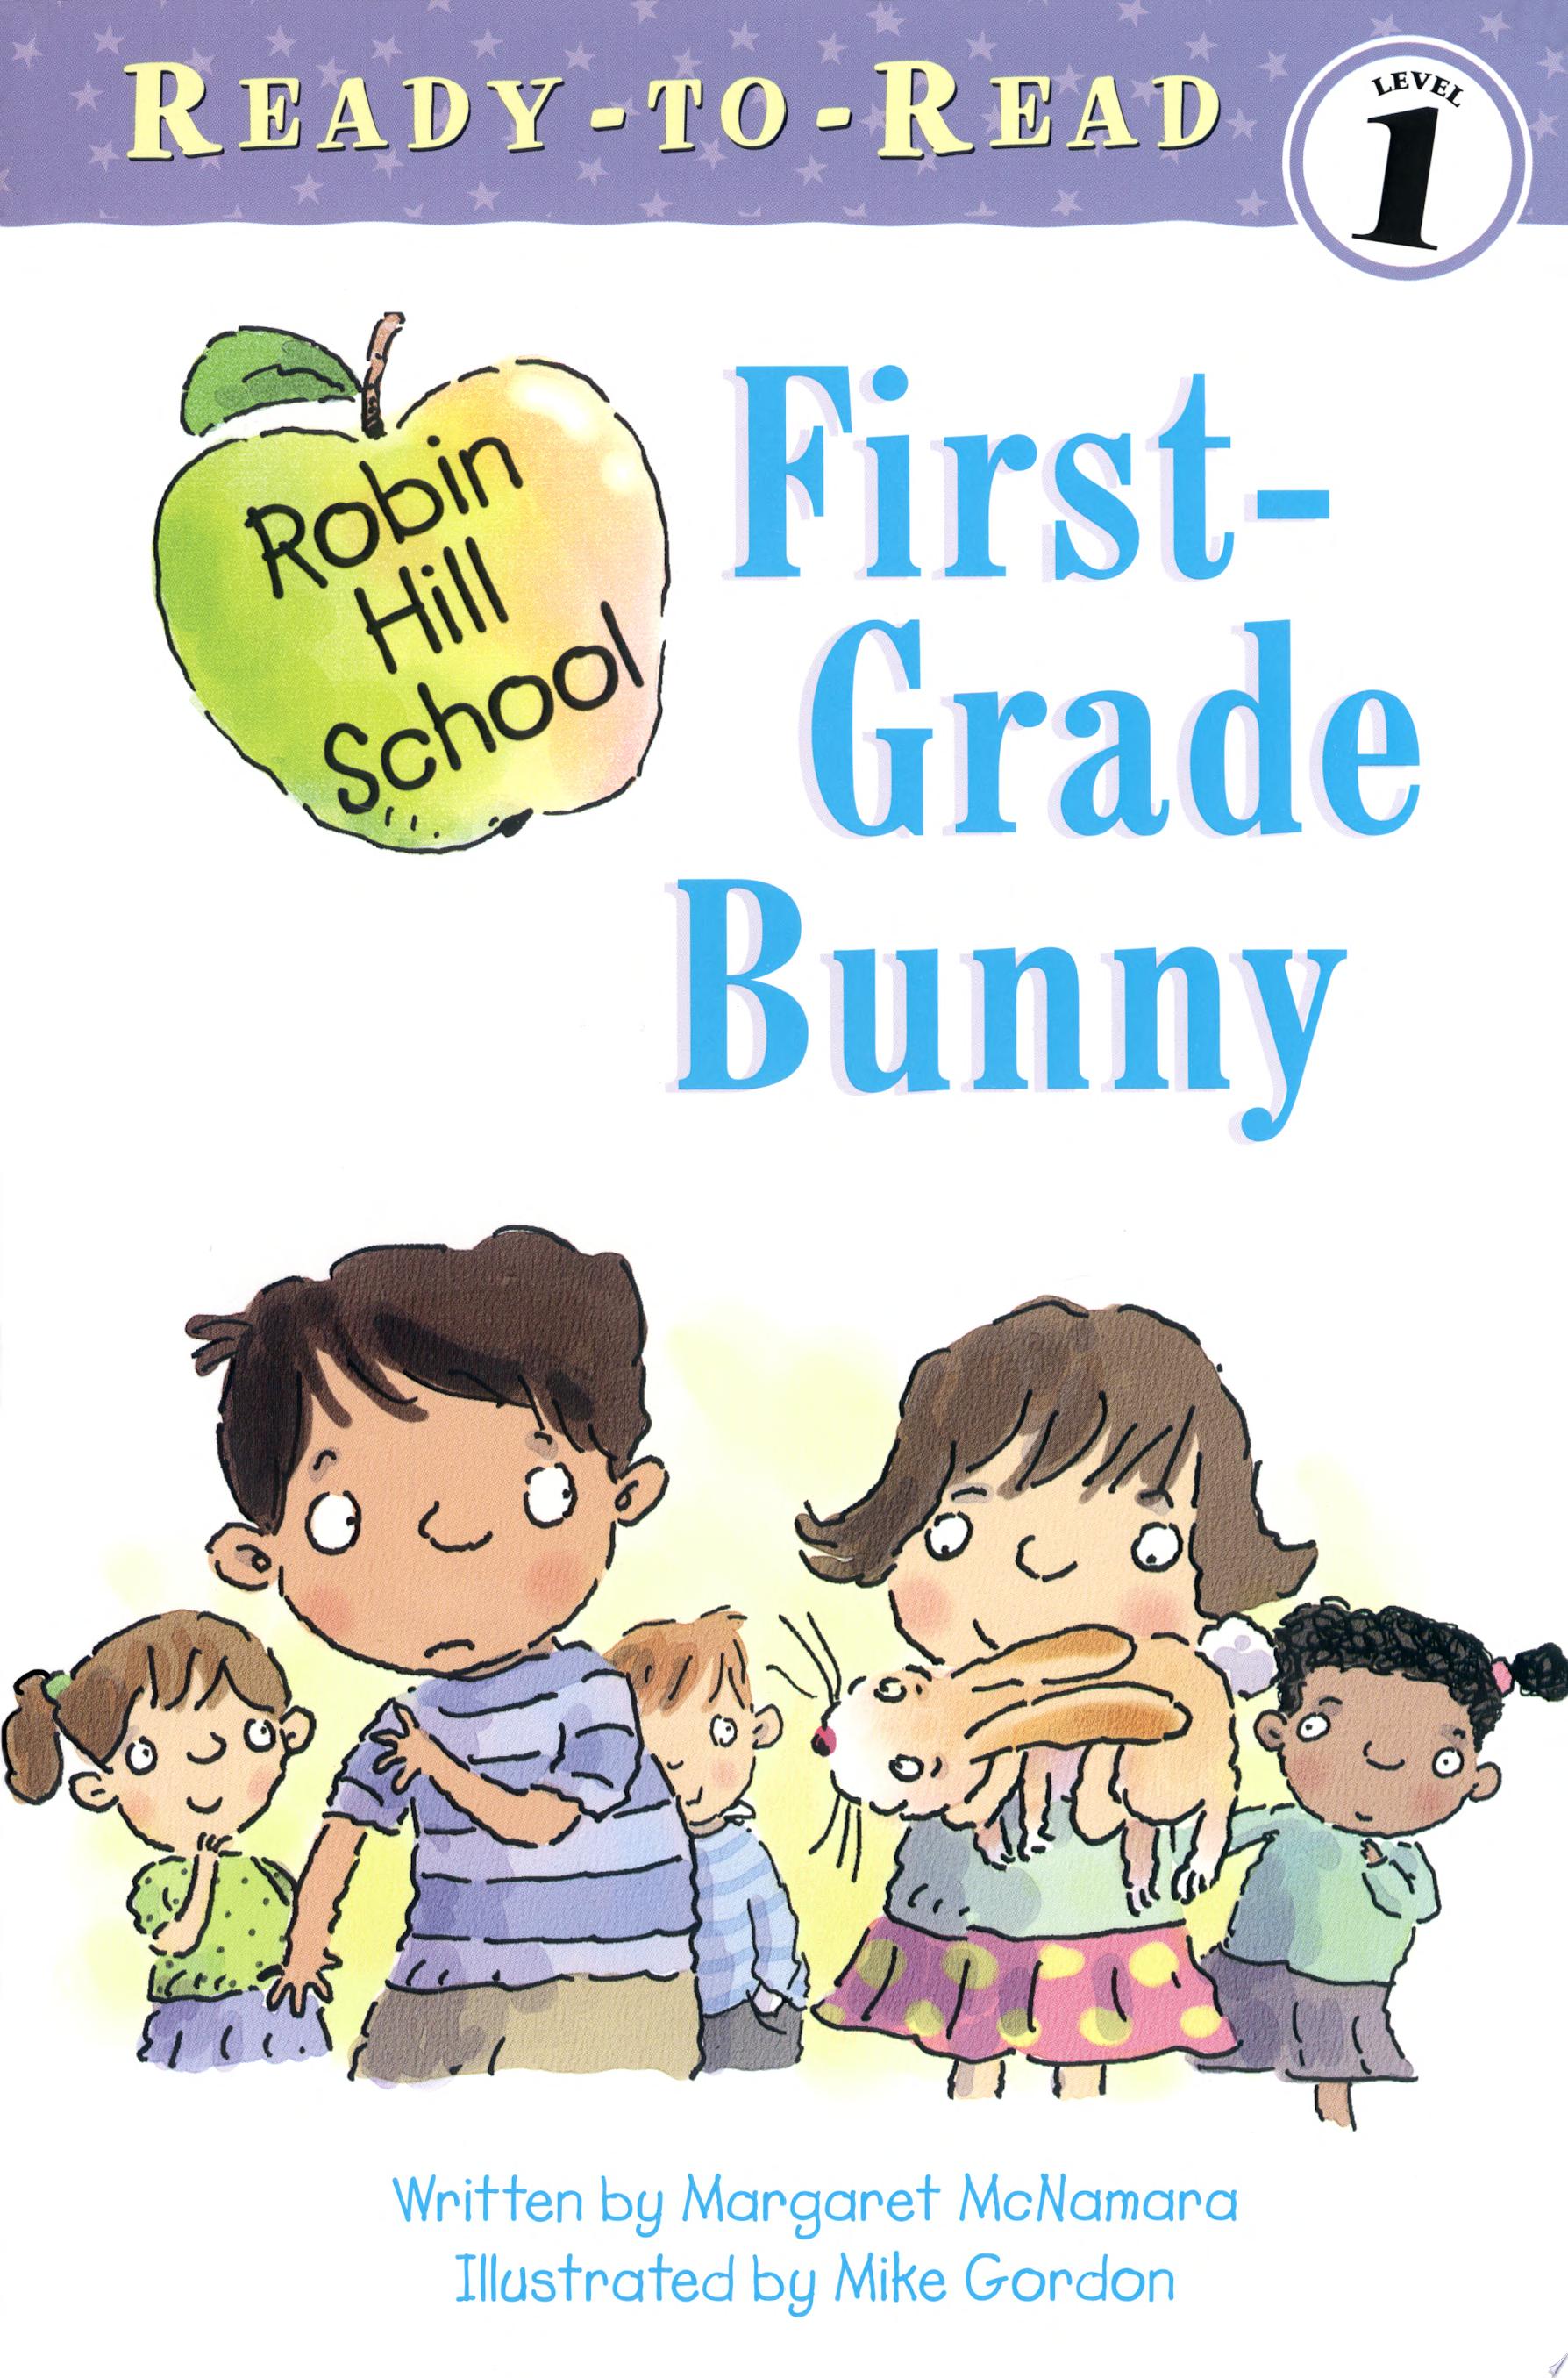 Image for "First-Grade Bunny"